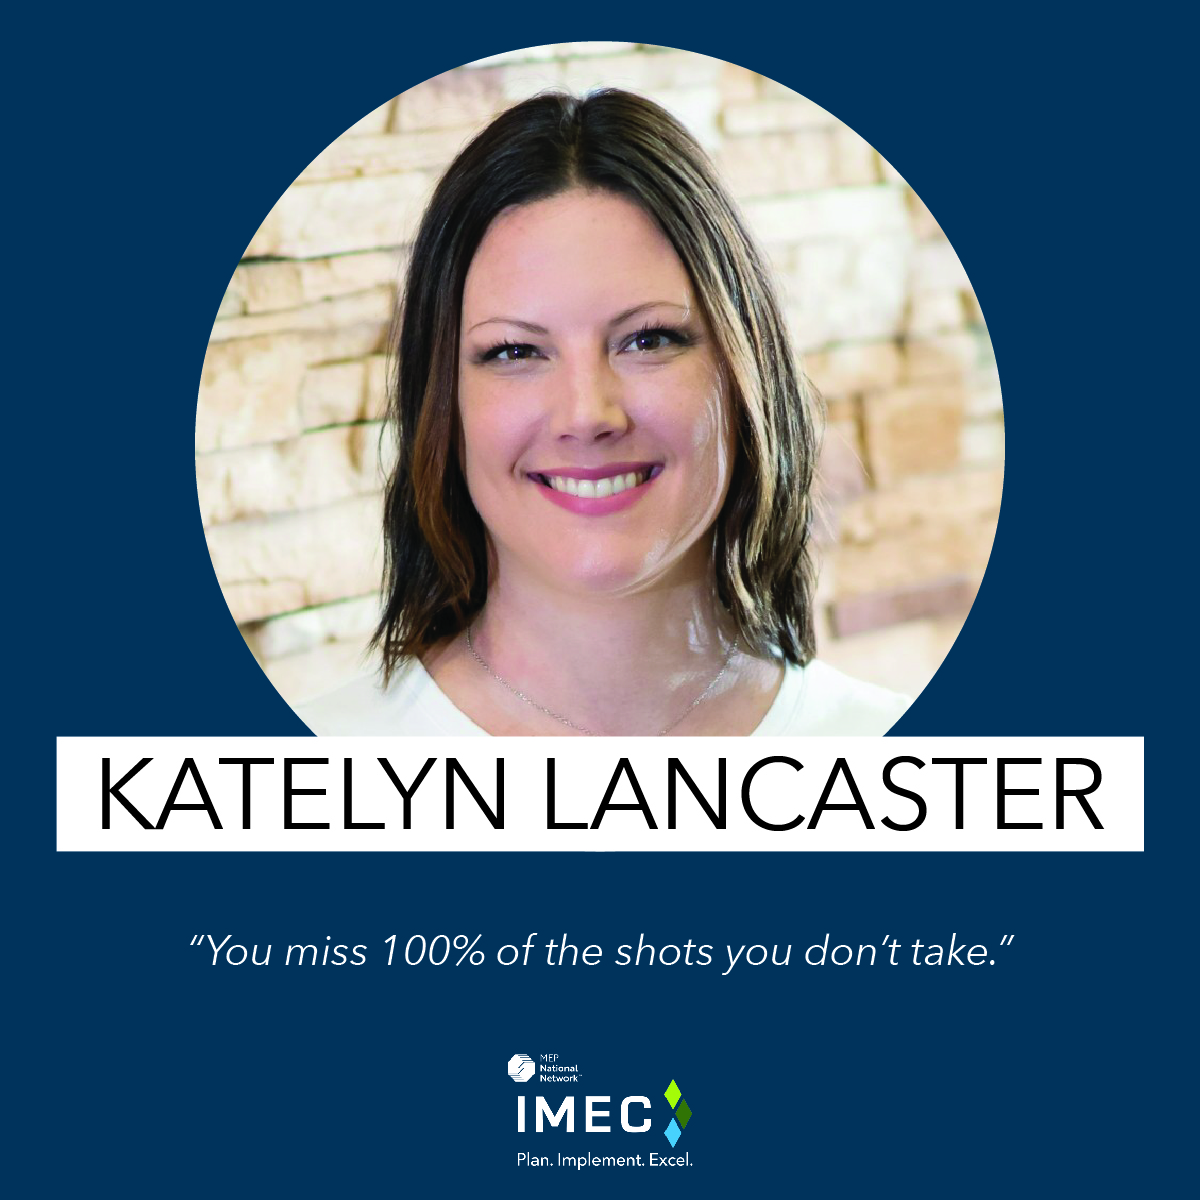 We are excited to announce the newest member of the IMEC Marketing Team, Katelyn Lancaster! She brings a positive energy to our team that we're excited to share with everyone; join us in welcoming Katelyn! Learn more about Katelyn at bit.ly/4aXpW7d